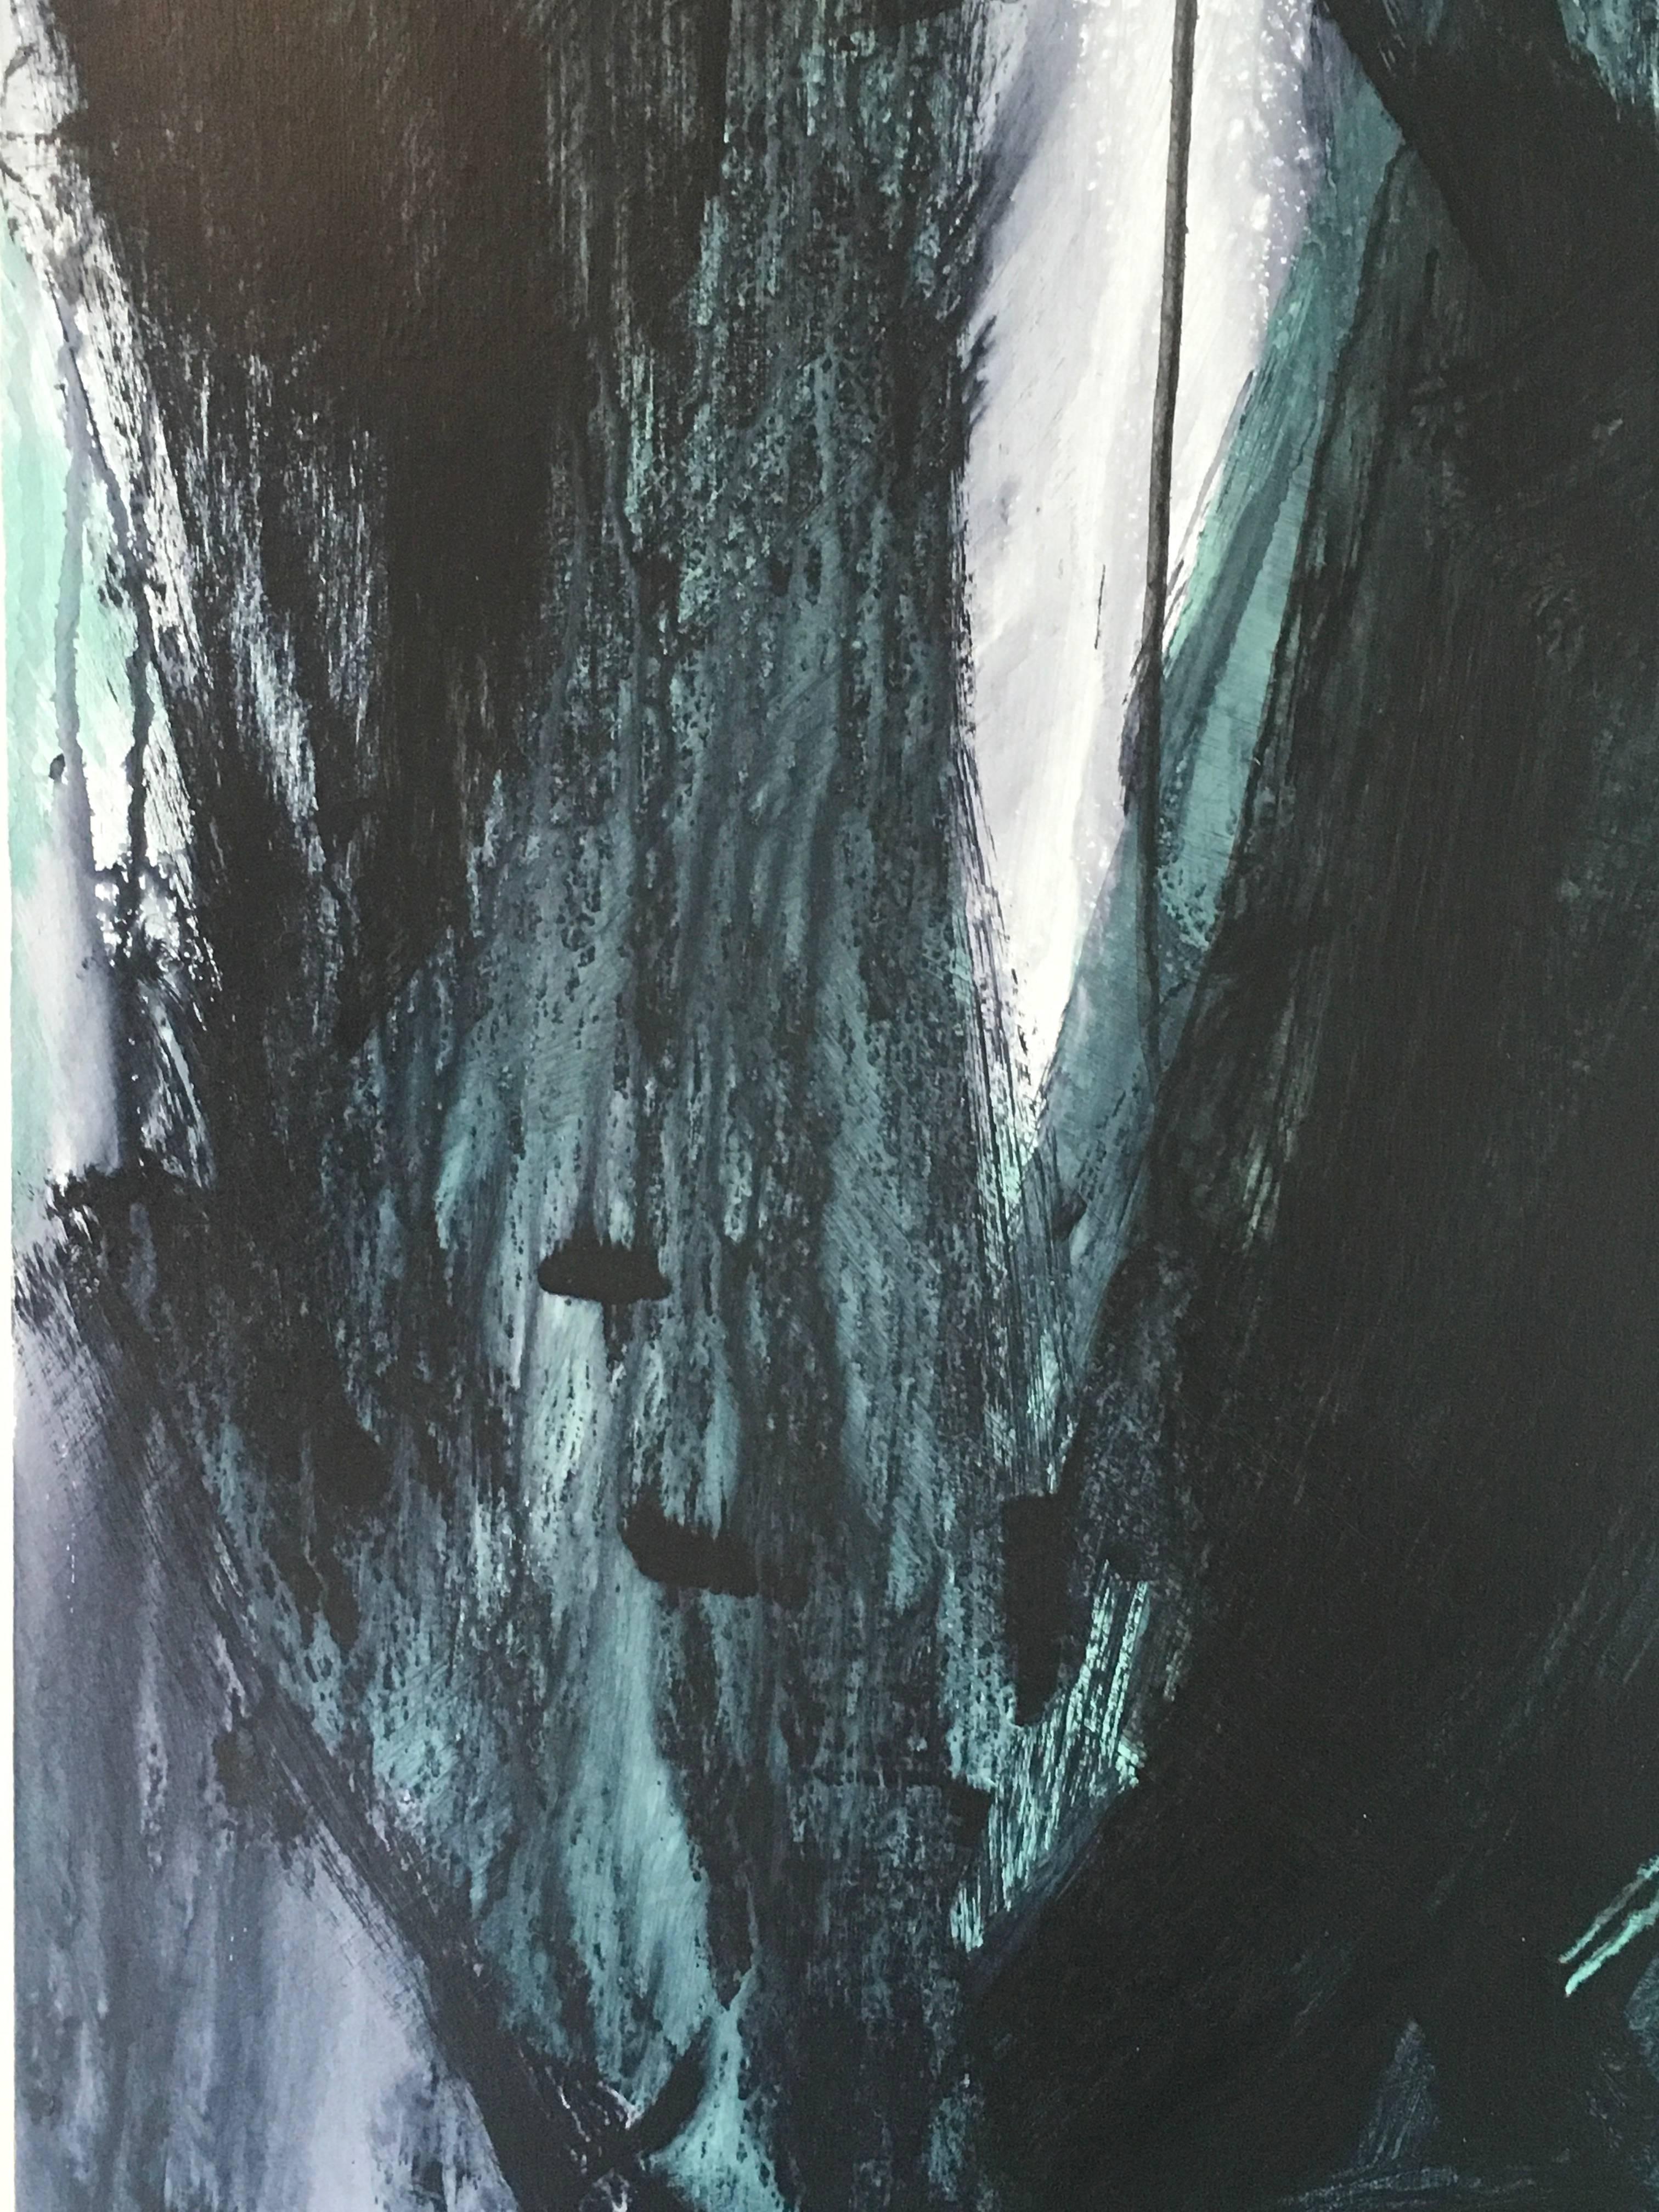 Europa 22 by Los Angeles artist Stephanie Cate is Acrylic on Wood Panel.  It is 48x36.  The black, white and green abstraction explores the Moon Europa, a planet with fire, ice and a potential for life.  It can be installed individually or as a